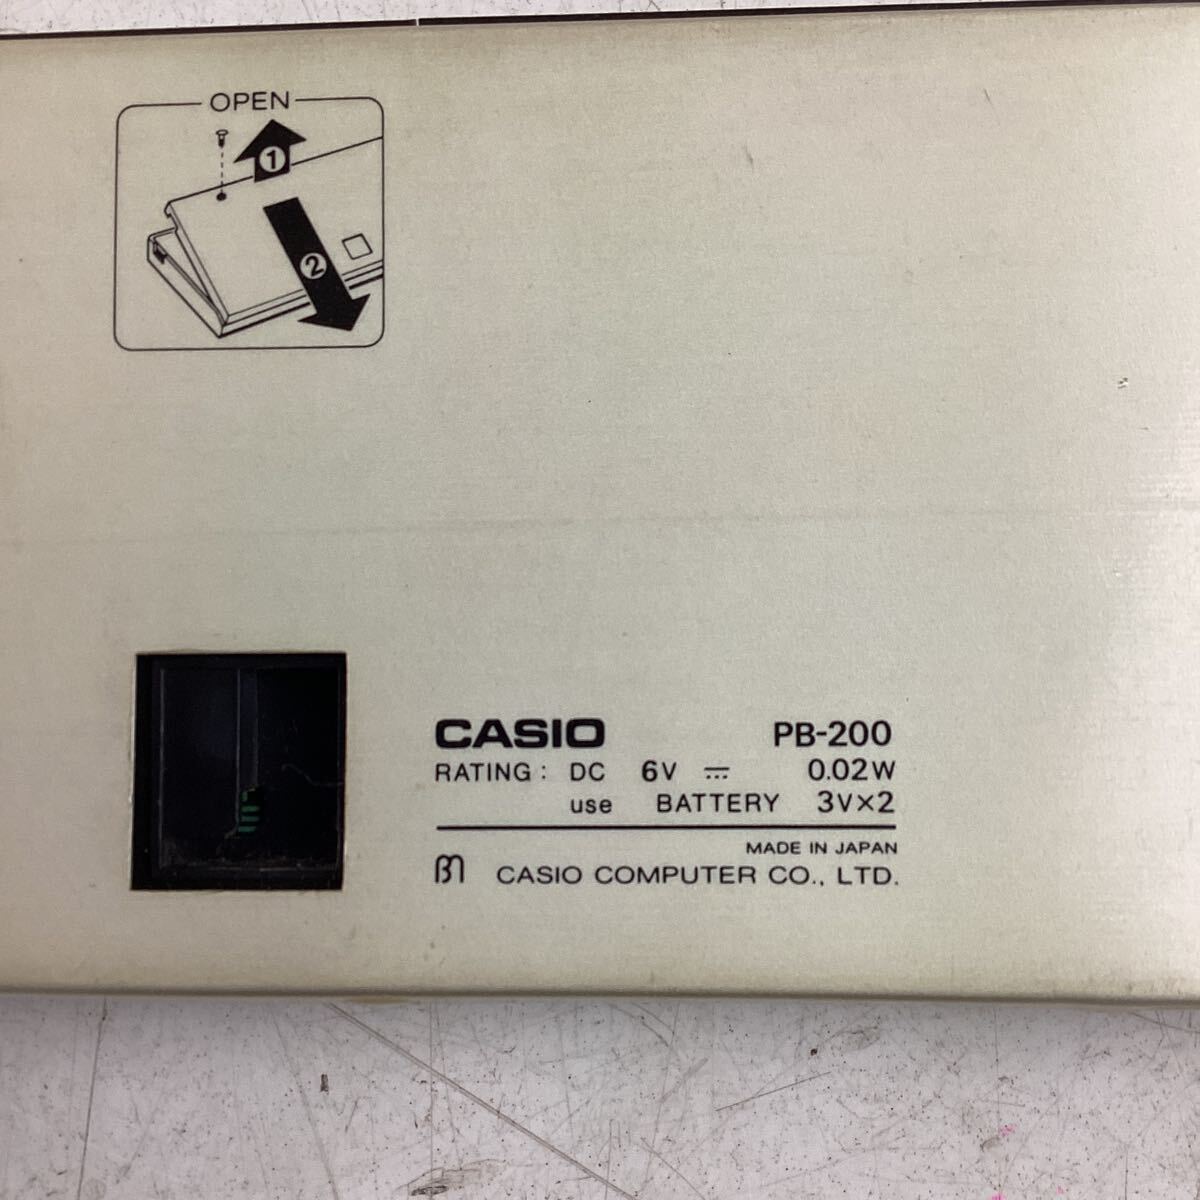 k5410 CASIO pocket computer PB-200 PERSONAL COMPUTER pocket computer Casio pocket computer - that time thing operation not yet verification used 